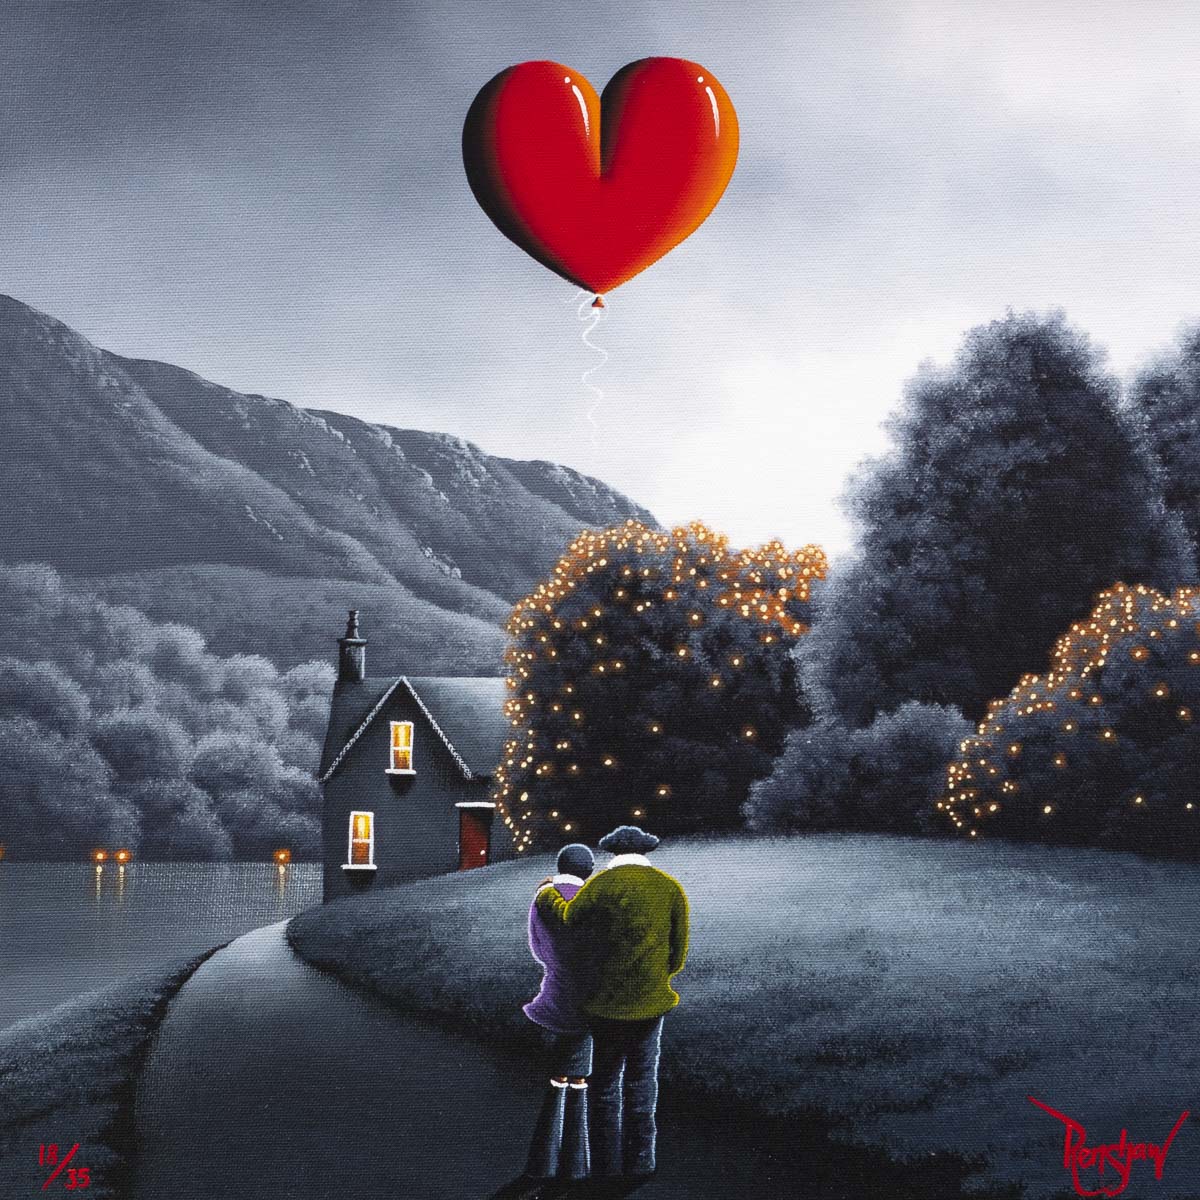 Home is Built with Love and Dreams - Edition David Renshaw Framed